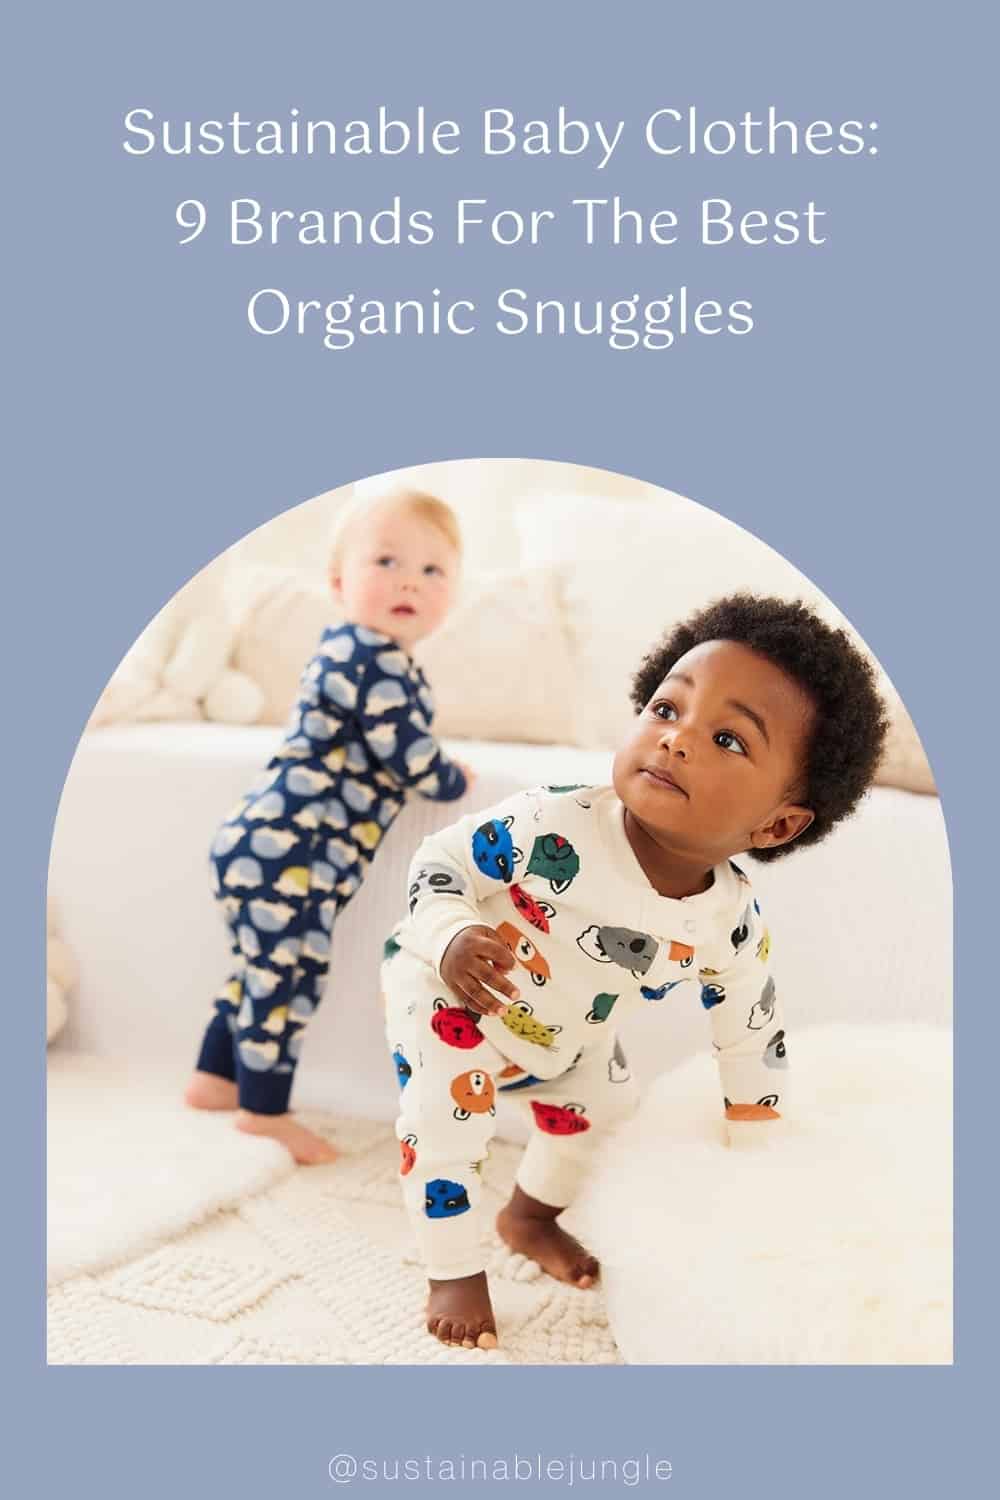 Sustainable Baby Clothes: 9 Brands For The Best Organic Snuggles #sustainablebabyclothes #organicbabyclothes #ecofriendlybabyclothes #ethicalbabyclothes #sustainablejungle image by Hanna Andersson